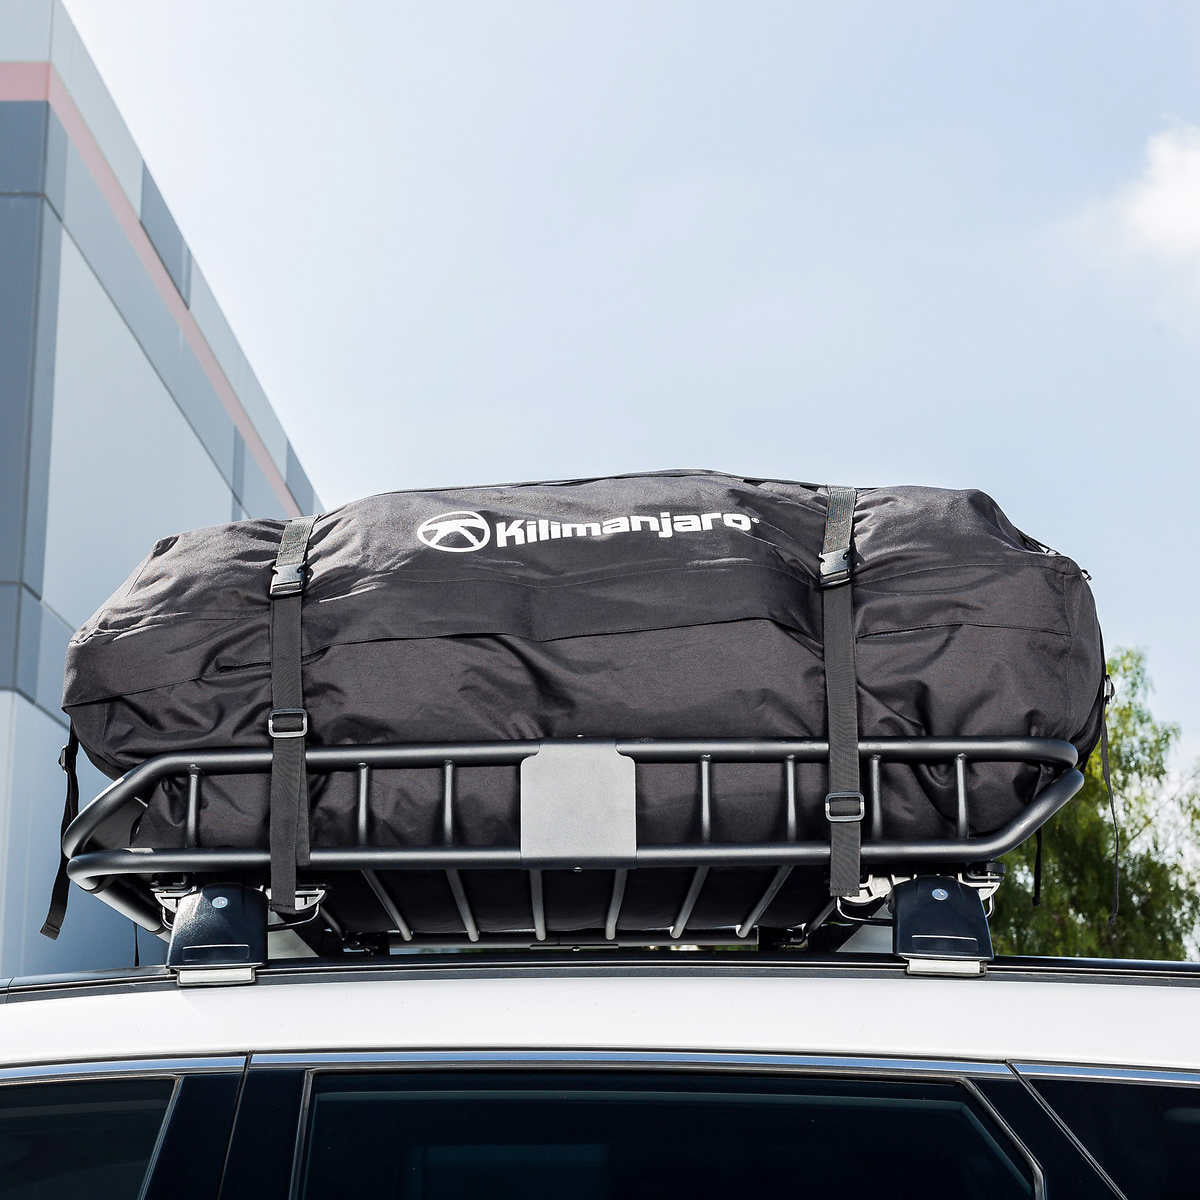 Kilimanjaro 109 cm x 89 cm (43 in. x 35 in.) Roof Mounted Cargo Basket with 600D PVC Coated Cargo Bag